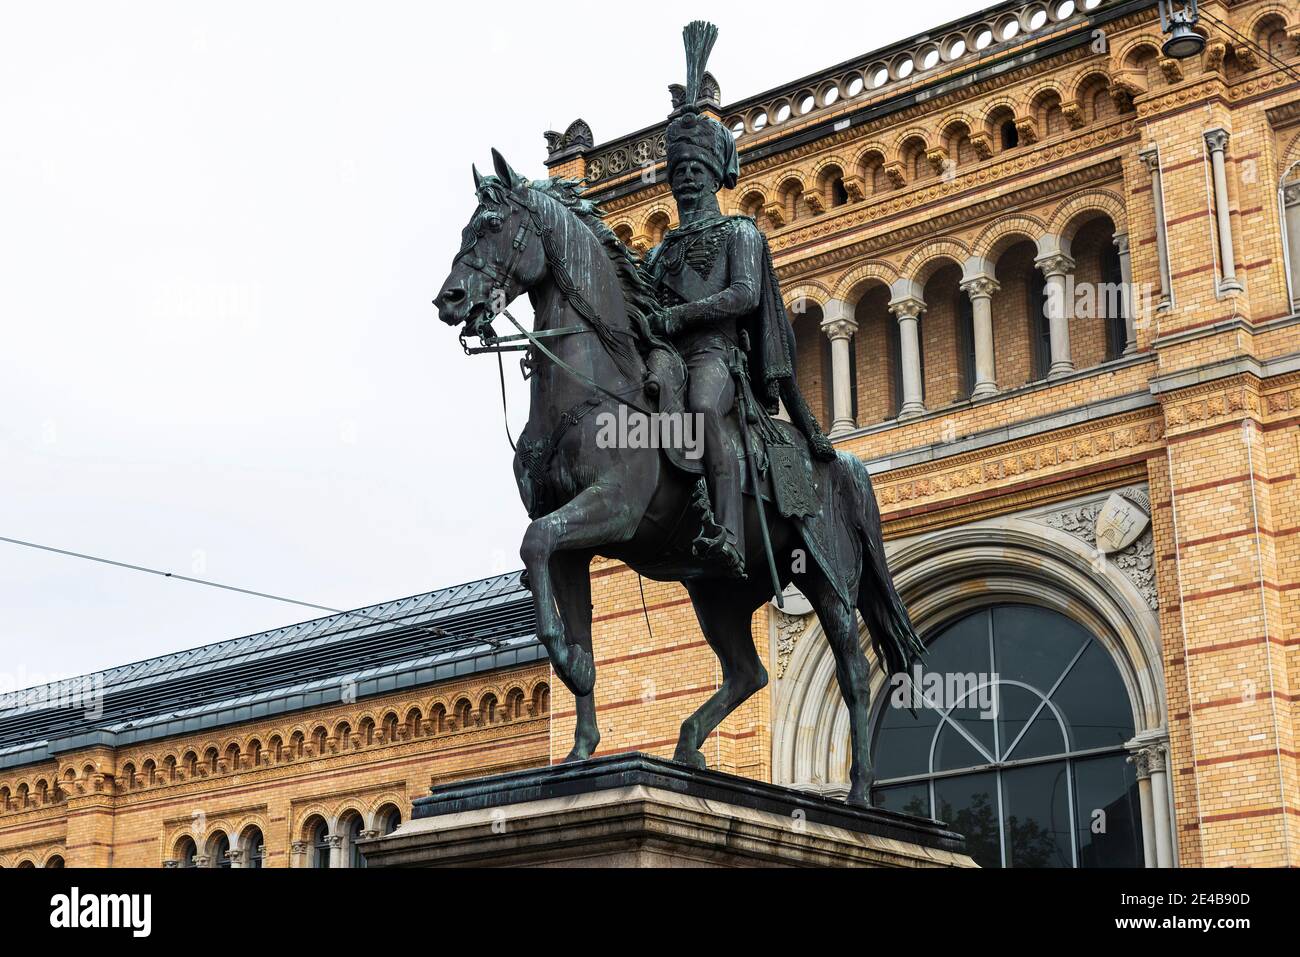 Equestrian statue of the Ernst August von Hannover in front of the Hauptbahnhof station in Hanover, Germany Stock Photo